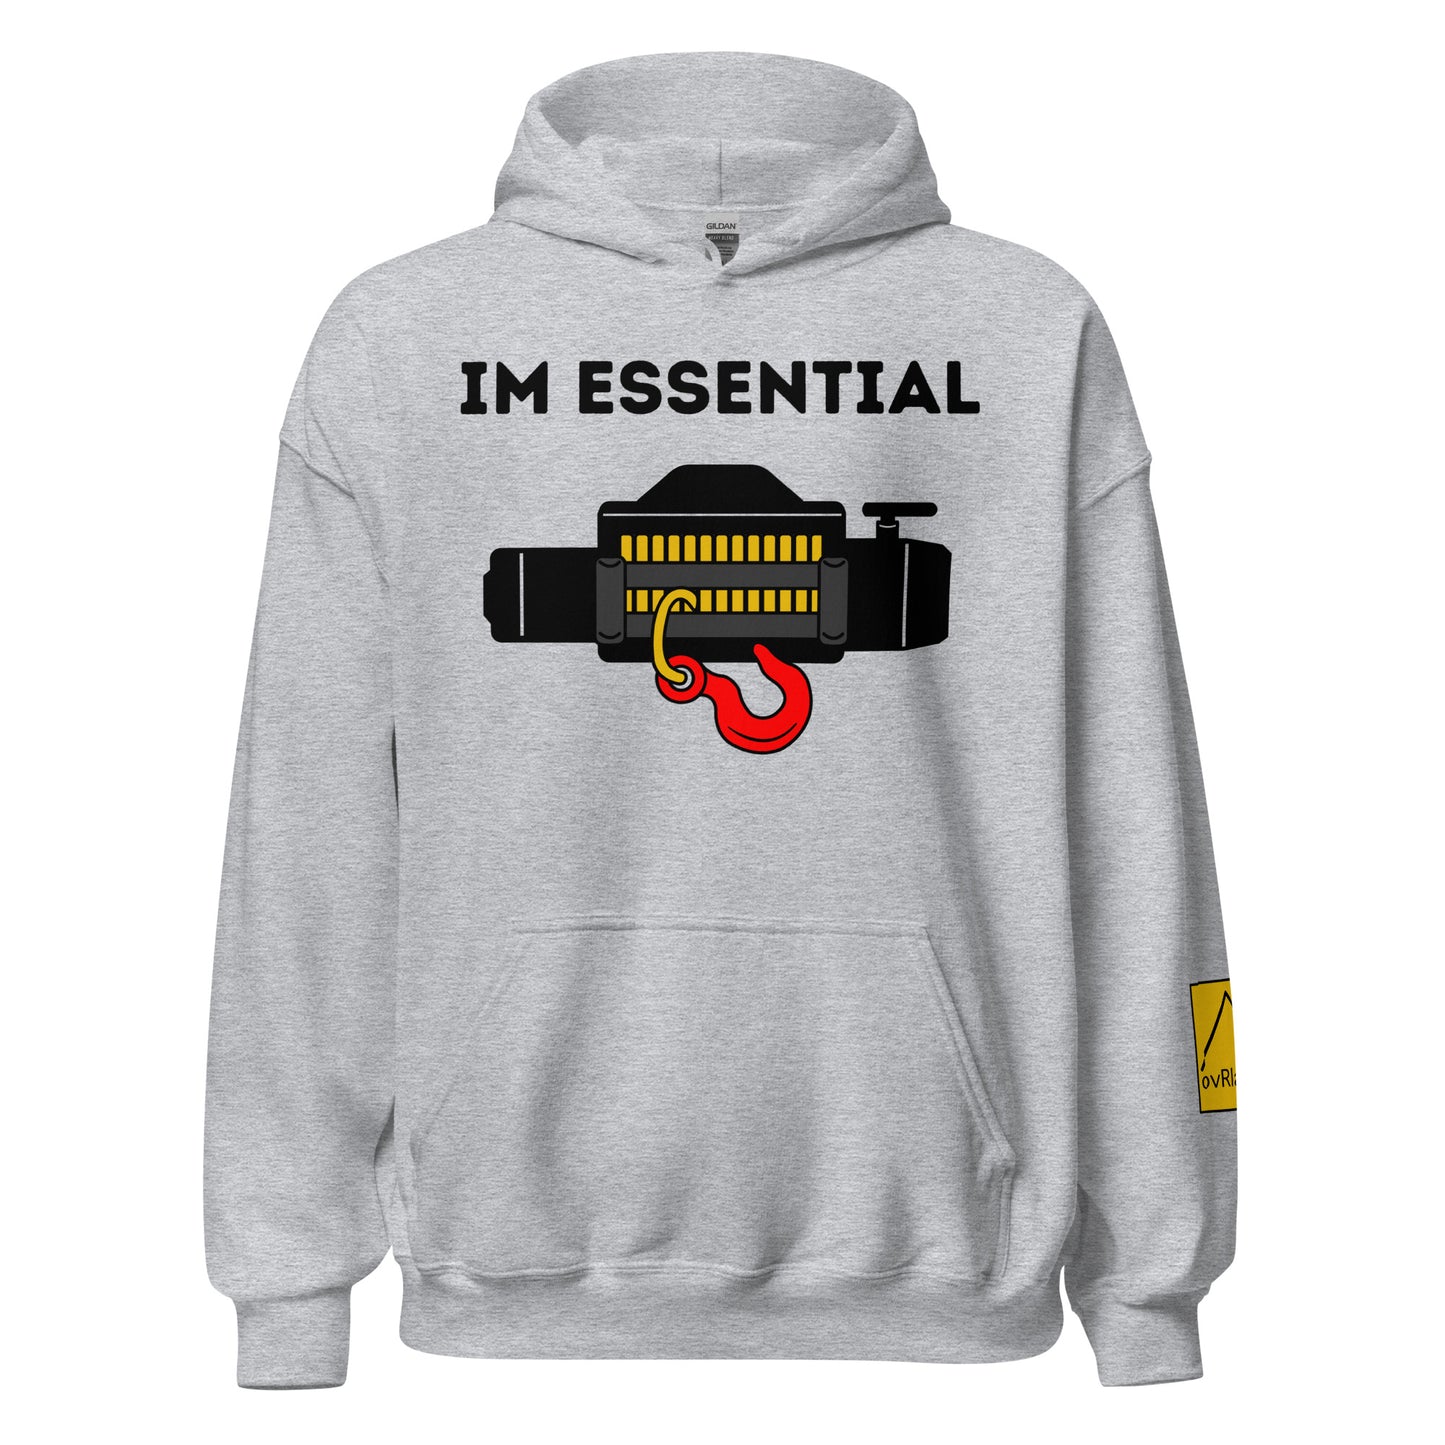 IM ESSENTIAL - Overland Off-roading recovery winch. Light Grey hoodie. overland365.com